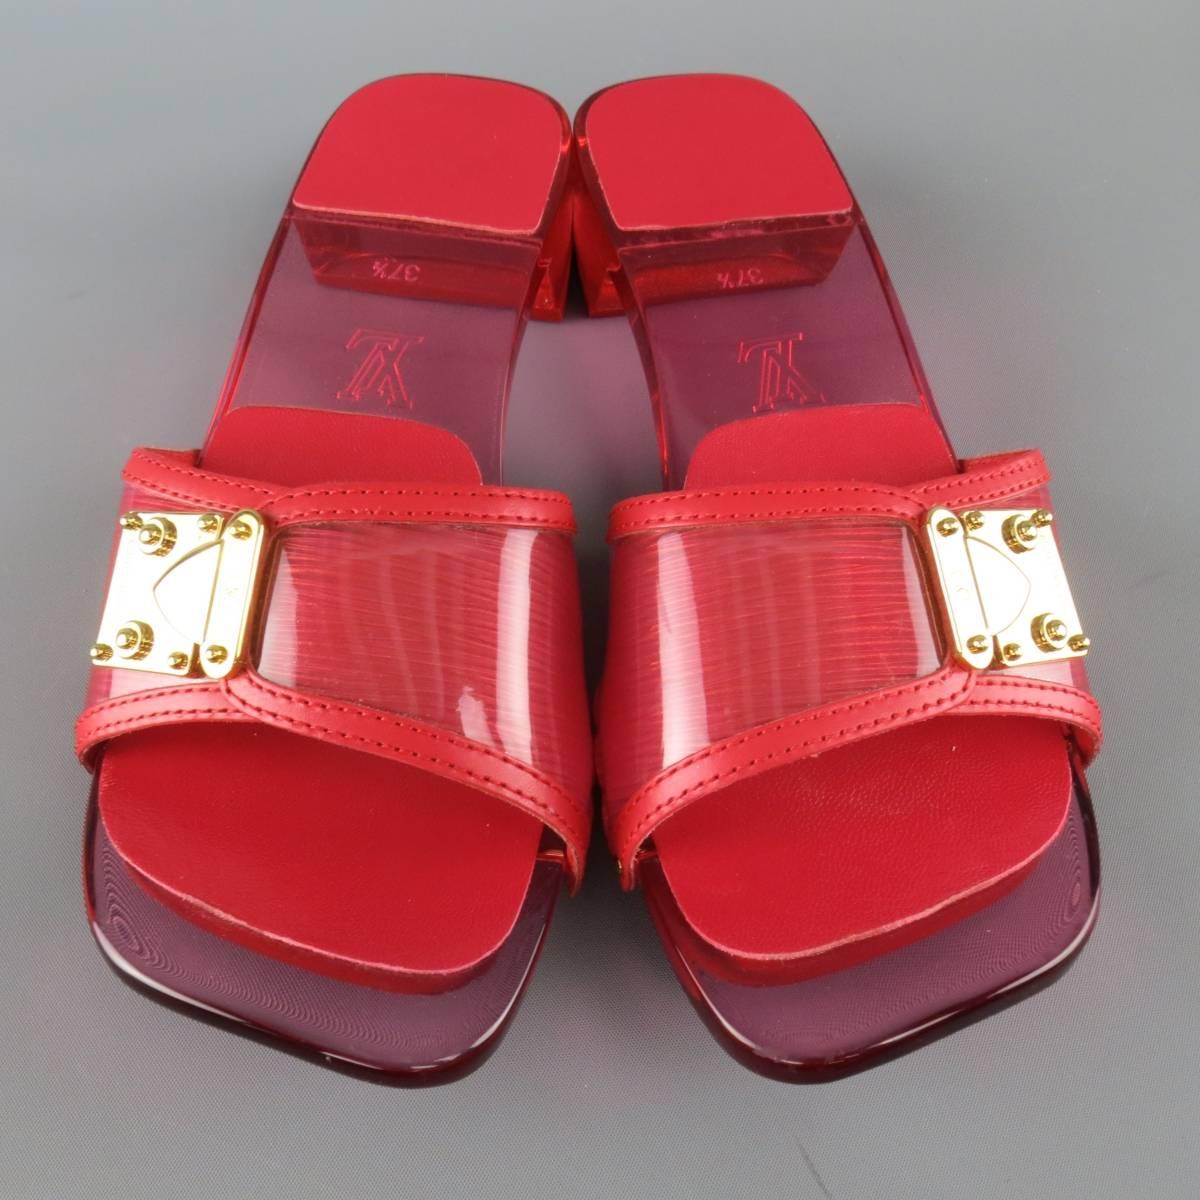 Women's LOUIS VUITTON Size 7.5 Red Patent Epi Leather Clear Heeled Gold Buckle Sandals